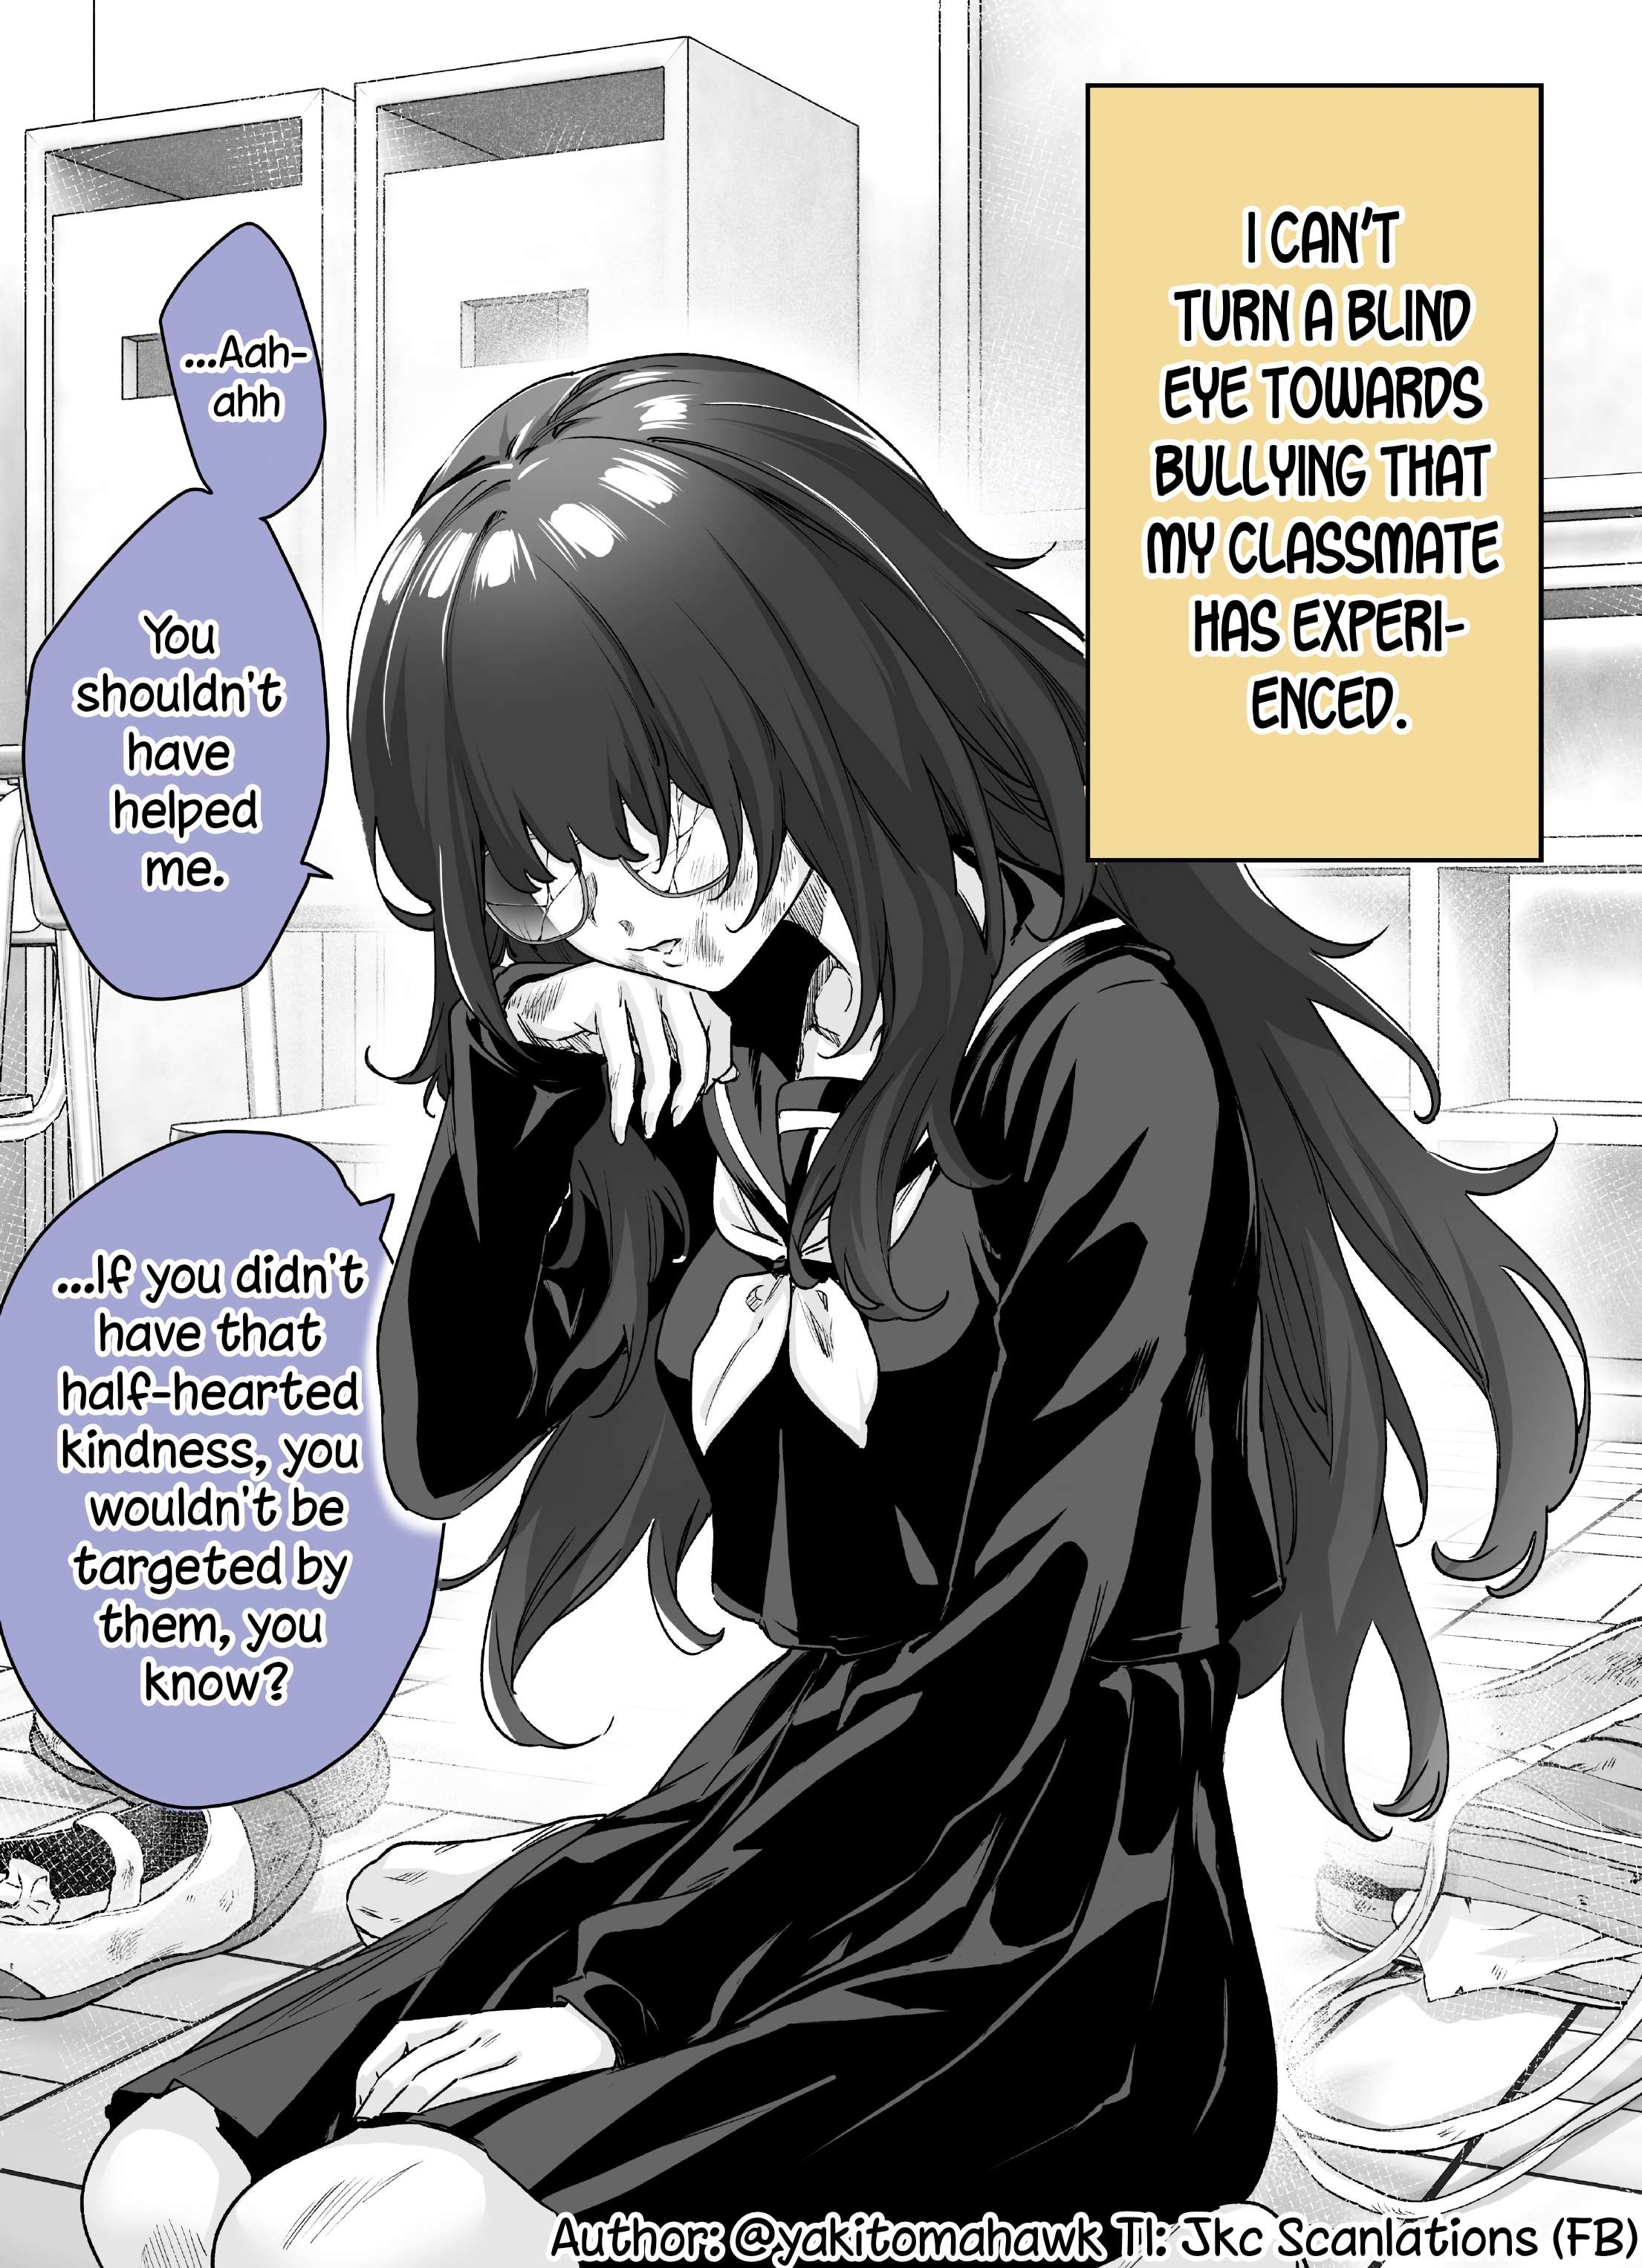 I Thought She Was A Yandere, But Apparently She’S Even Worse - chapter 1 - #1